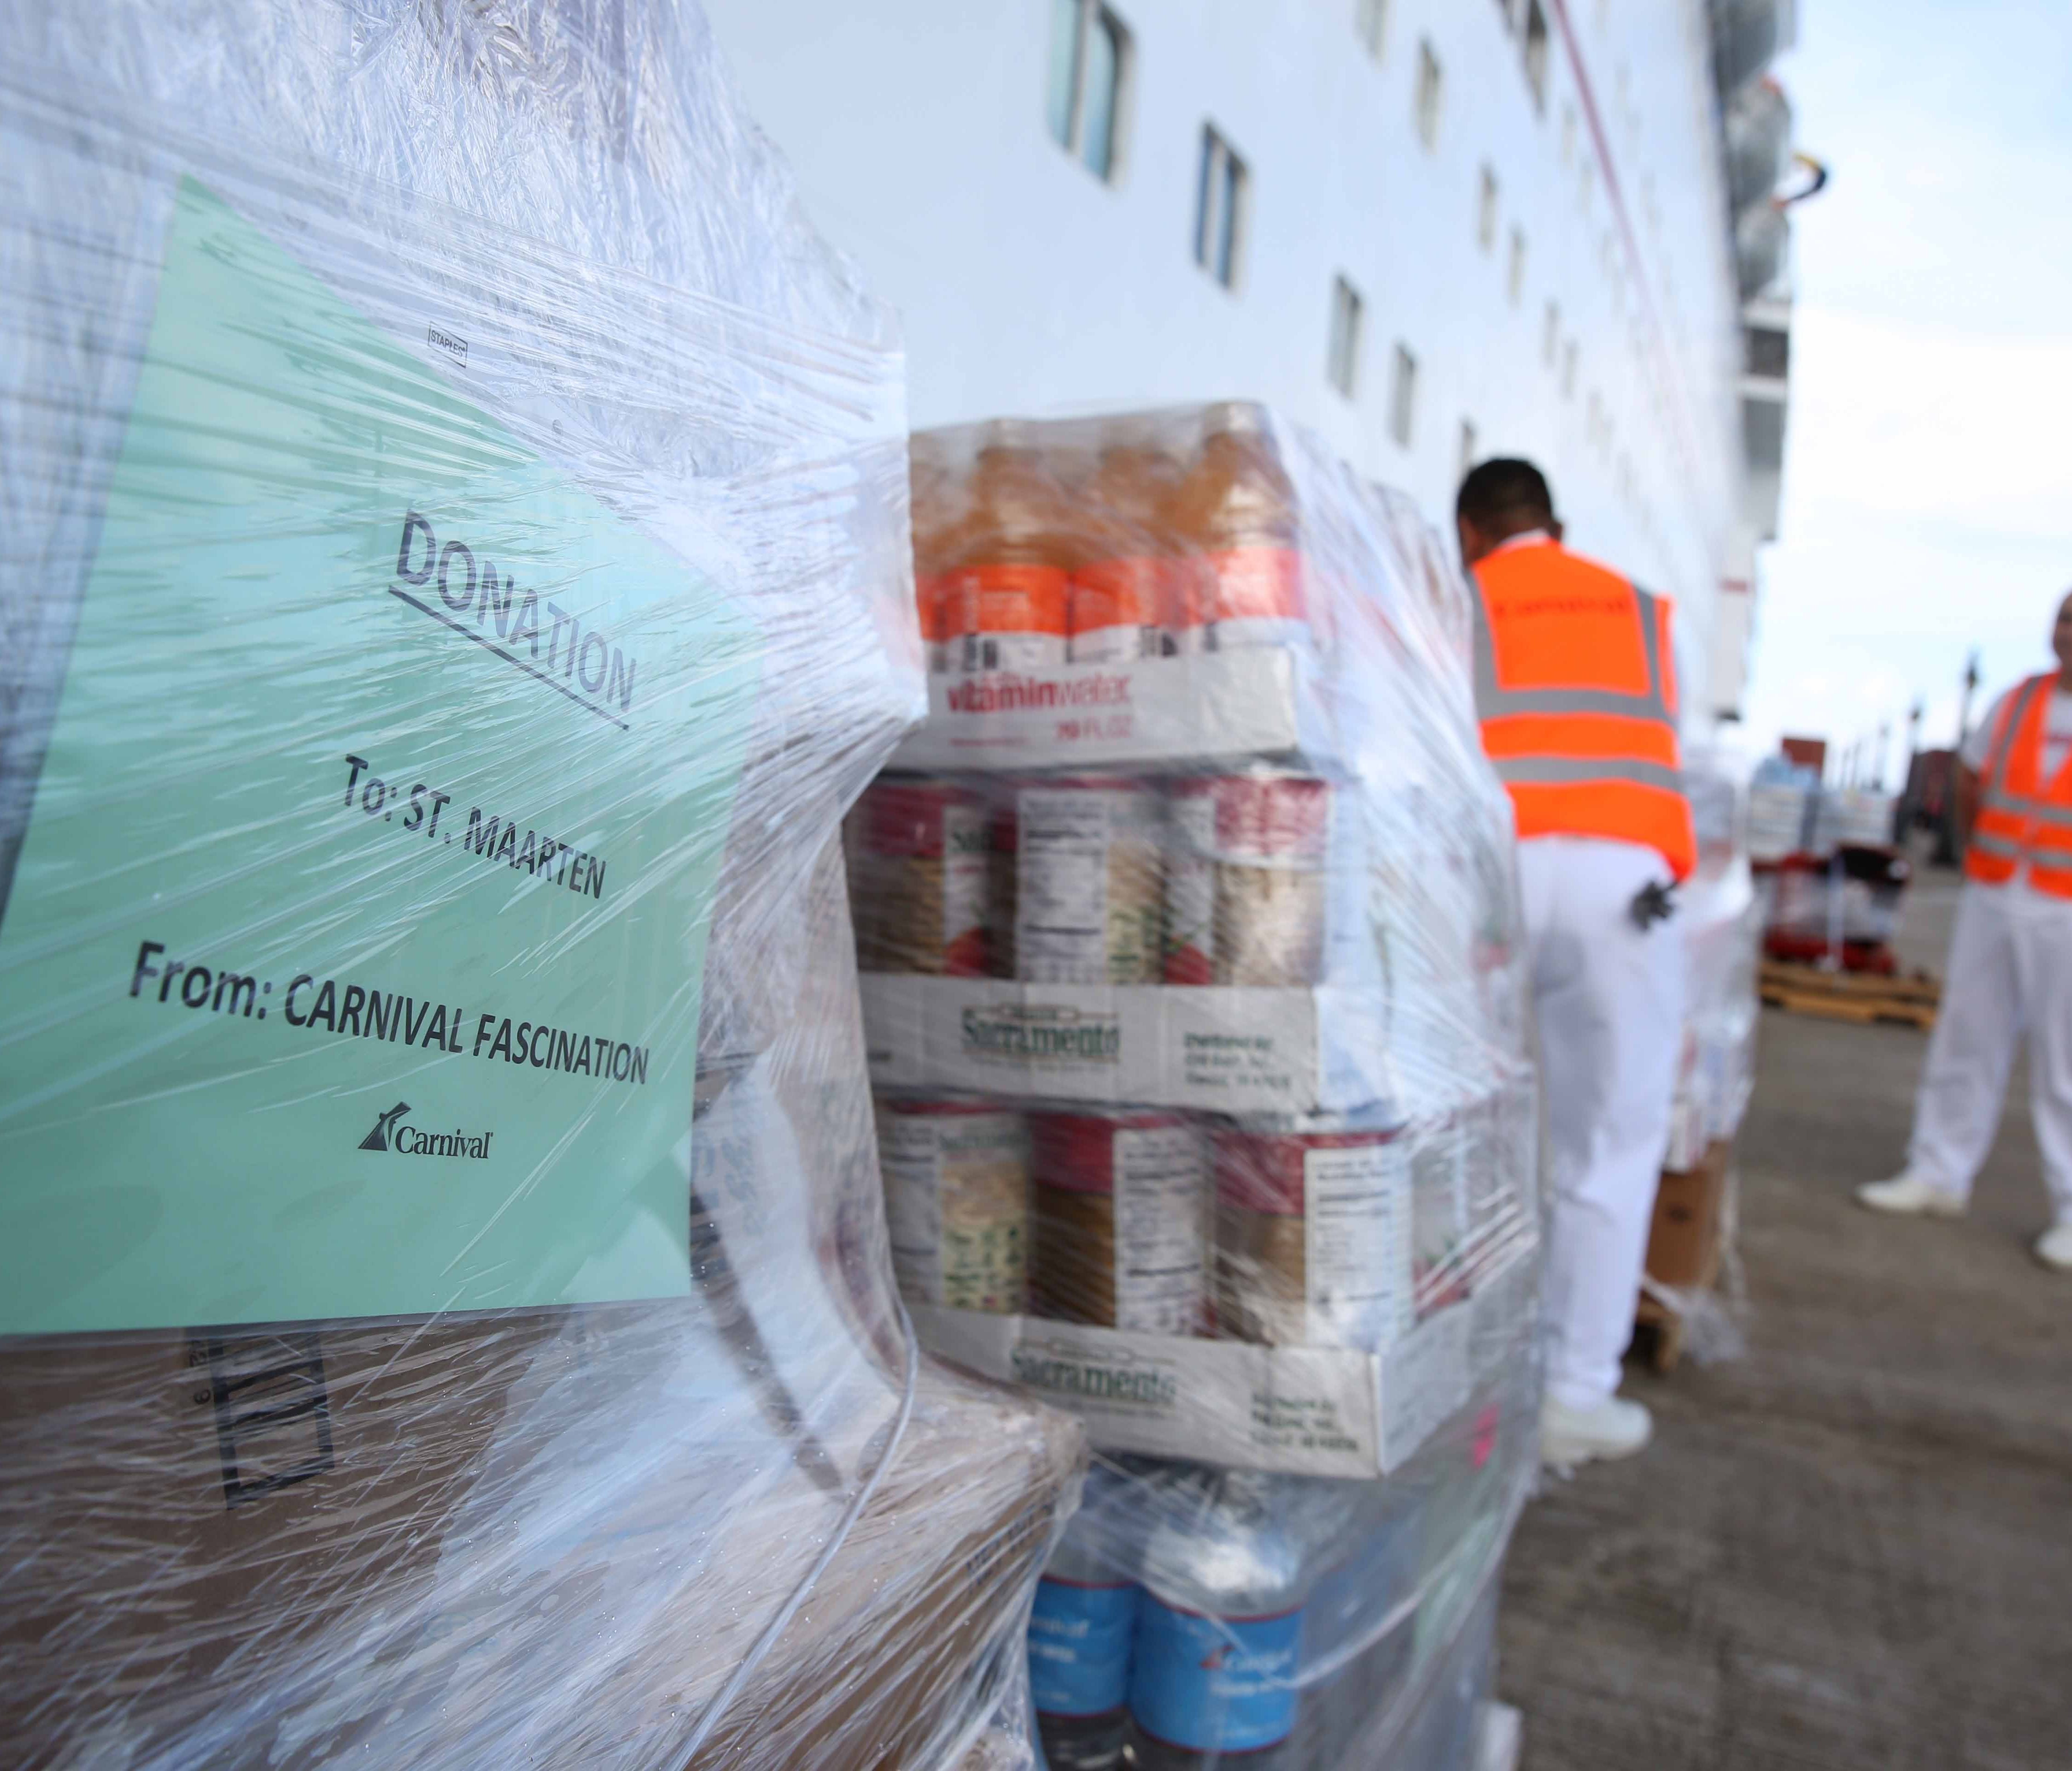 Relief supplies for hurricane-ravaged St. Maarten are unloaded from a Carnival cruise ship in the nearby island of St. Kitts.